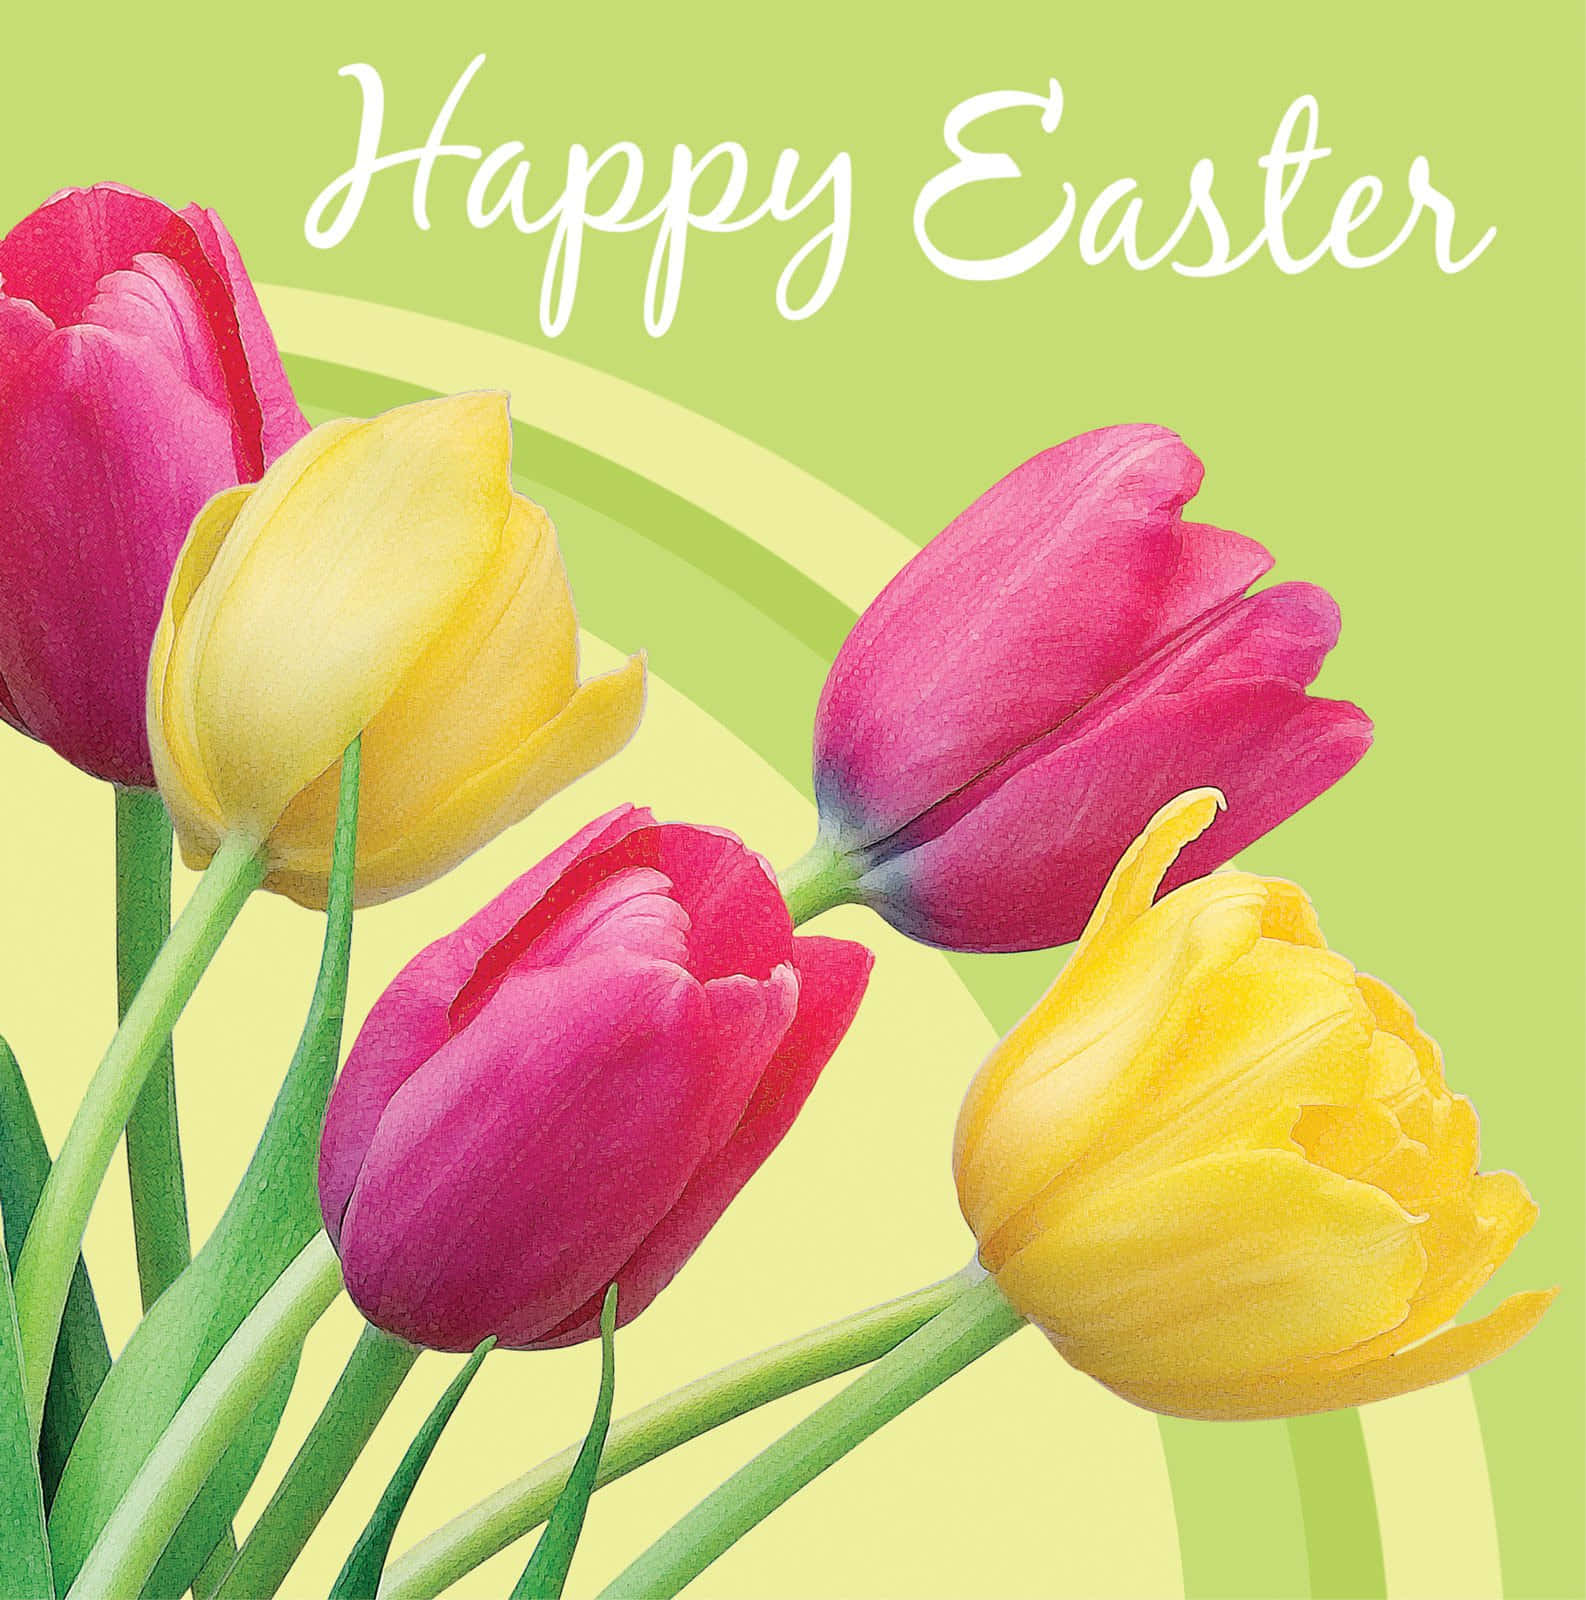 Celebrate Easter with a glimmer of joy and hope